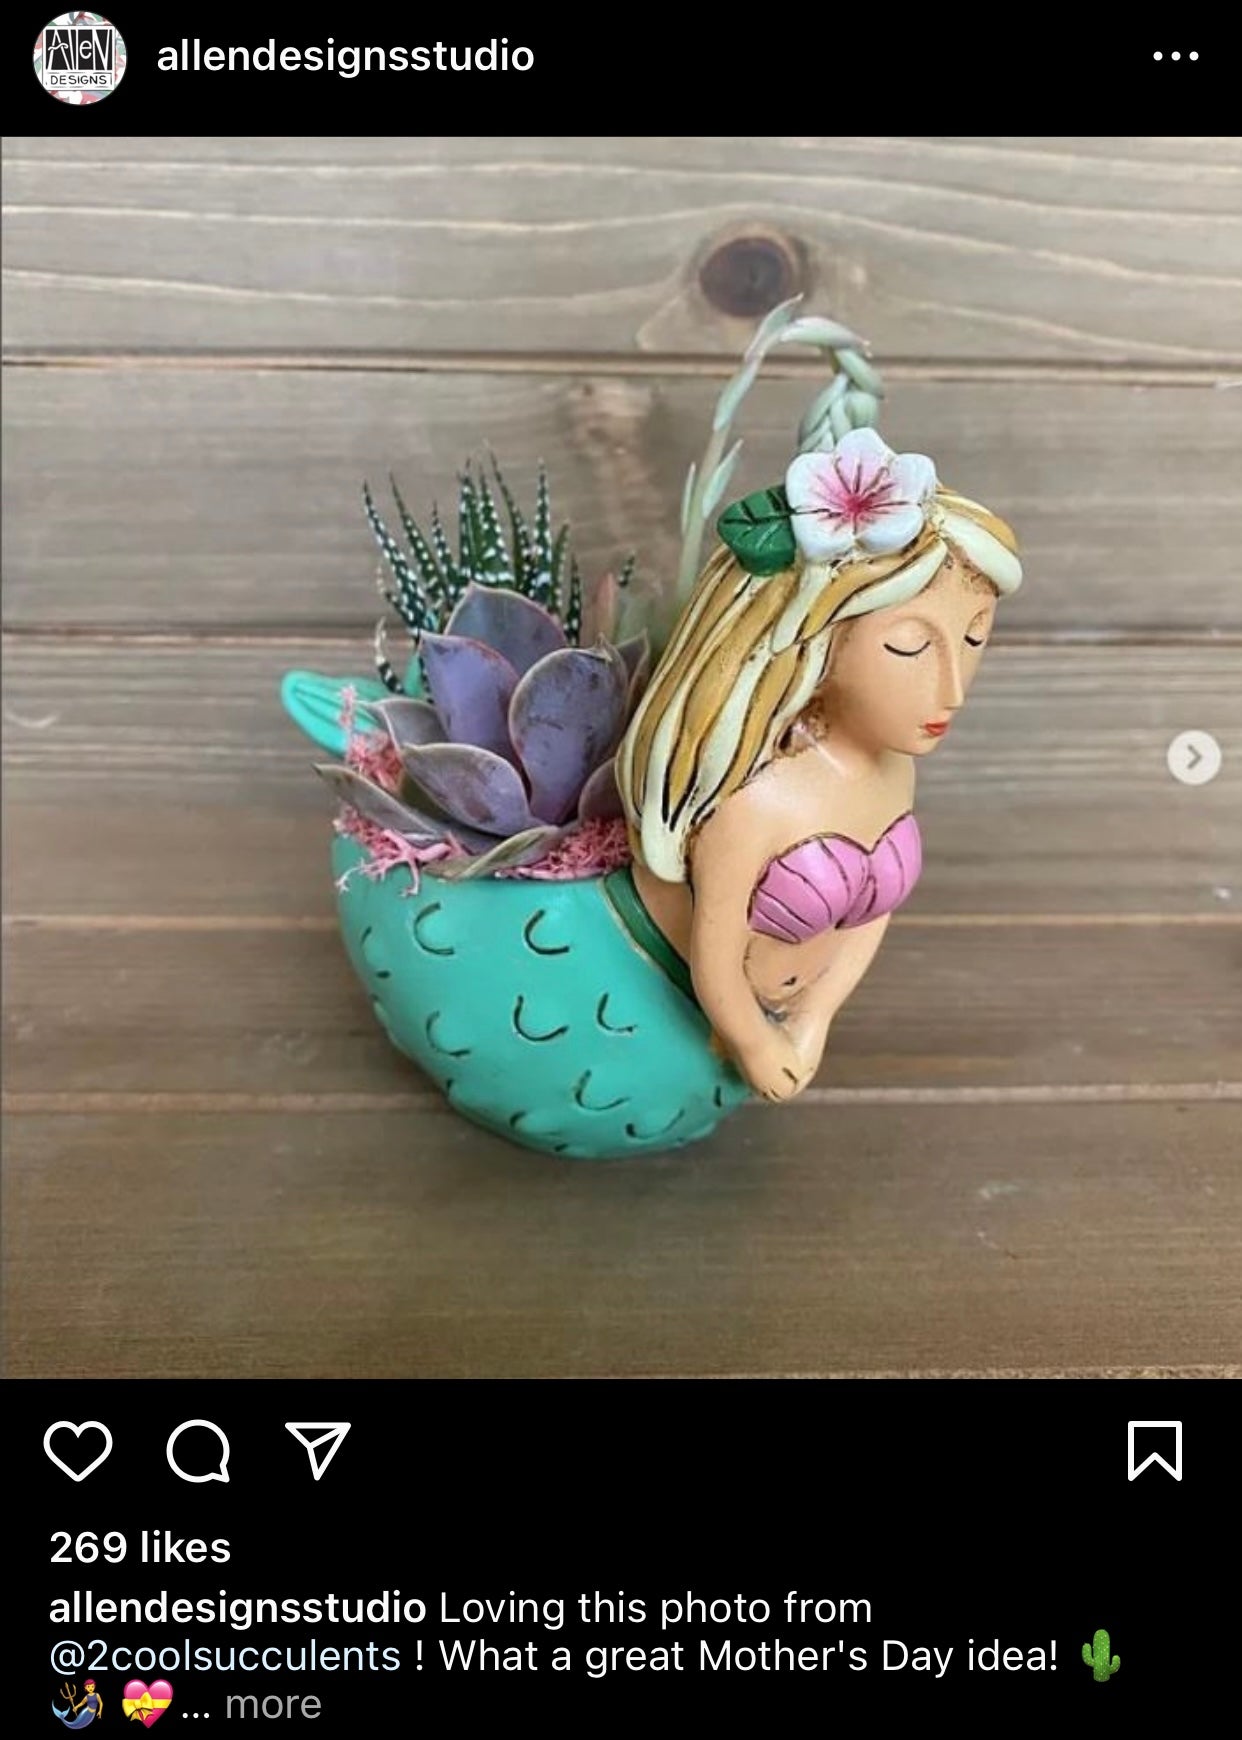 Mermaid Funky Pot Plant Planter - The Renmy Store Homewares & Gifts 